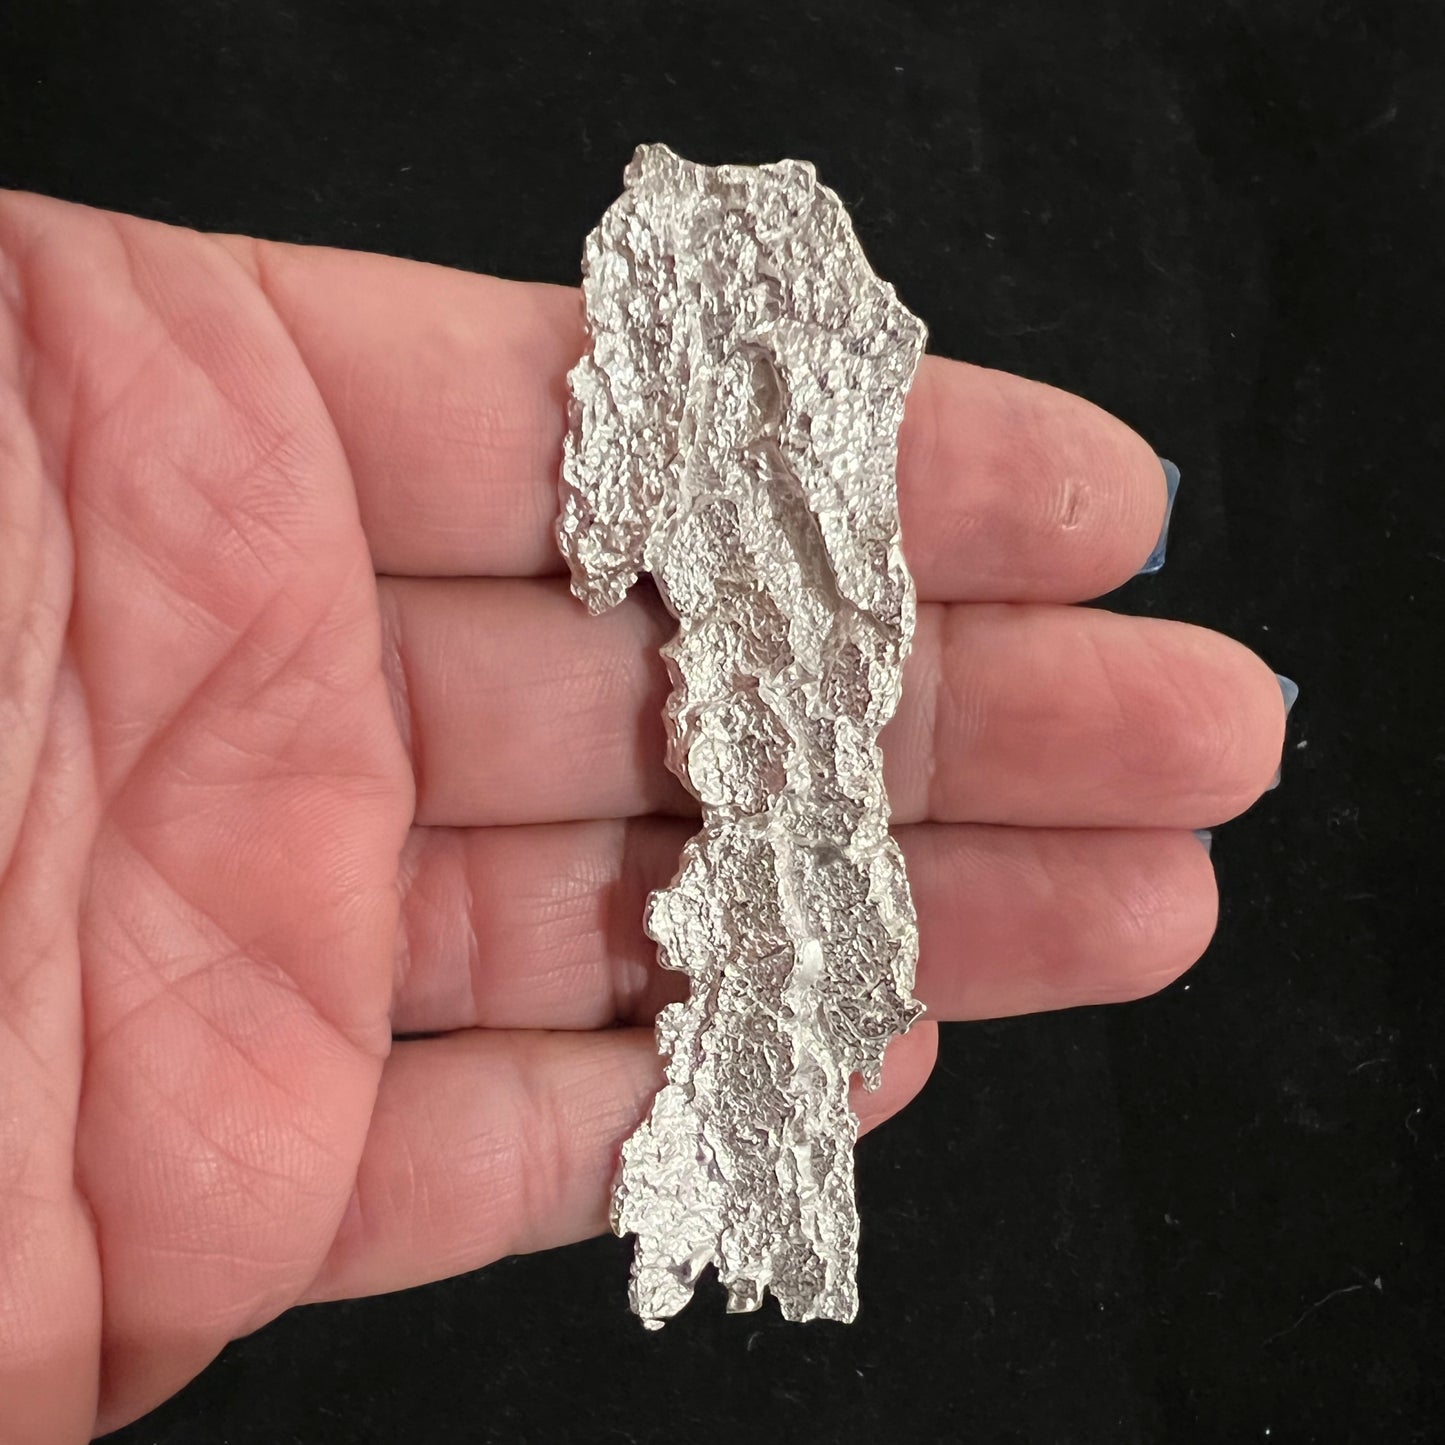 Tree Bark cast in Sterling Silver for Jewelry Design